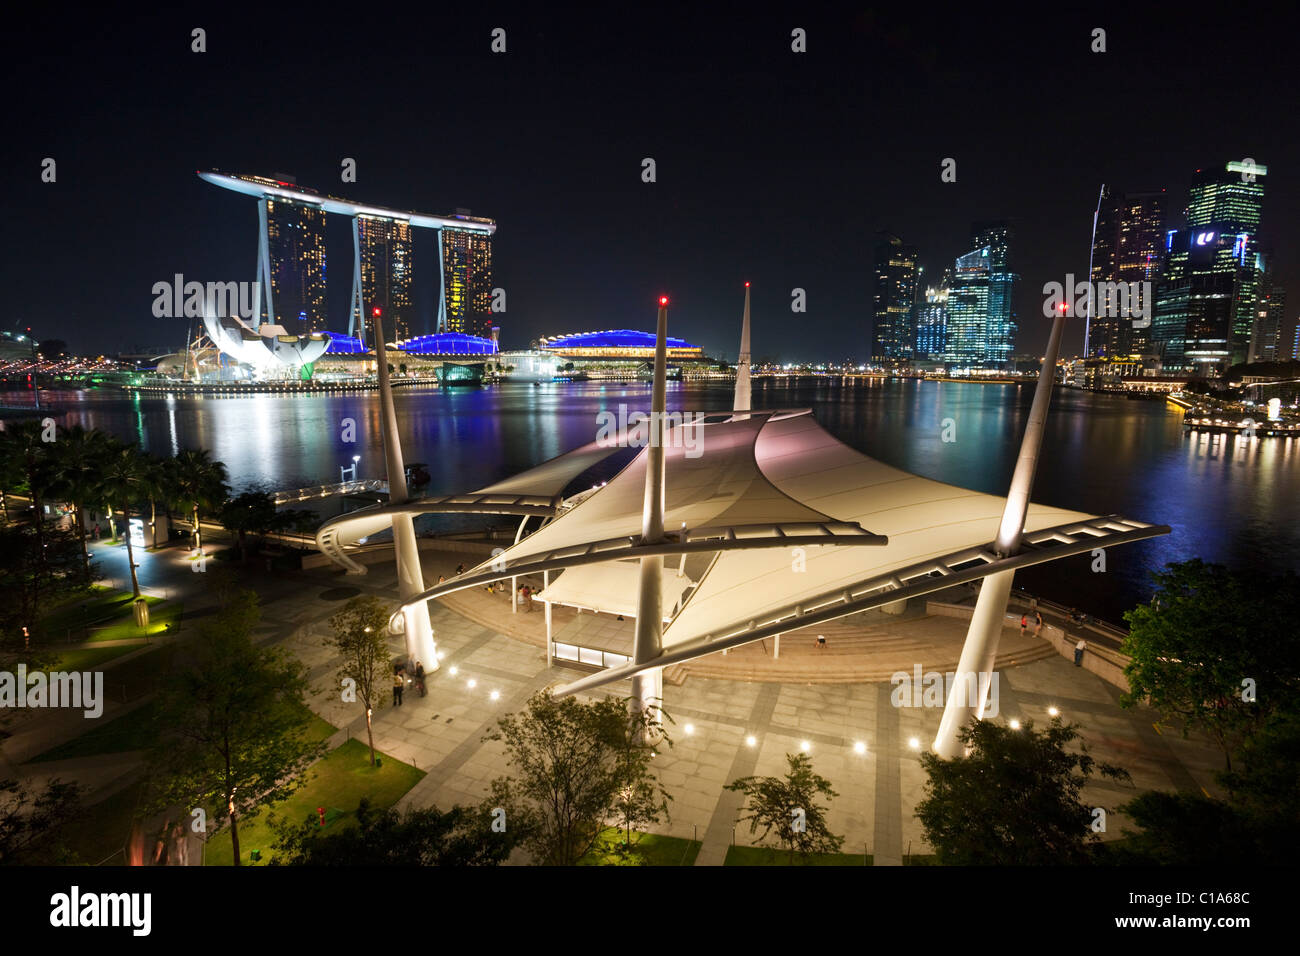 Outdoor Theatre with the Marina Bay Sands in the background.  Marina Bay, Singapore Stock Photo